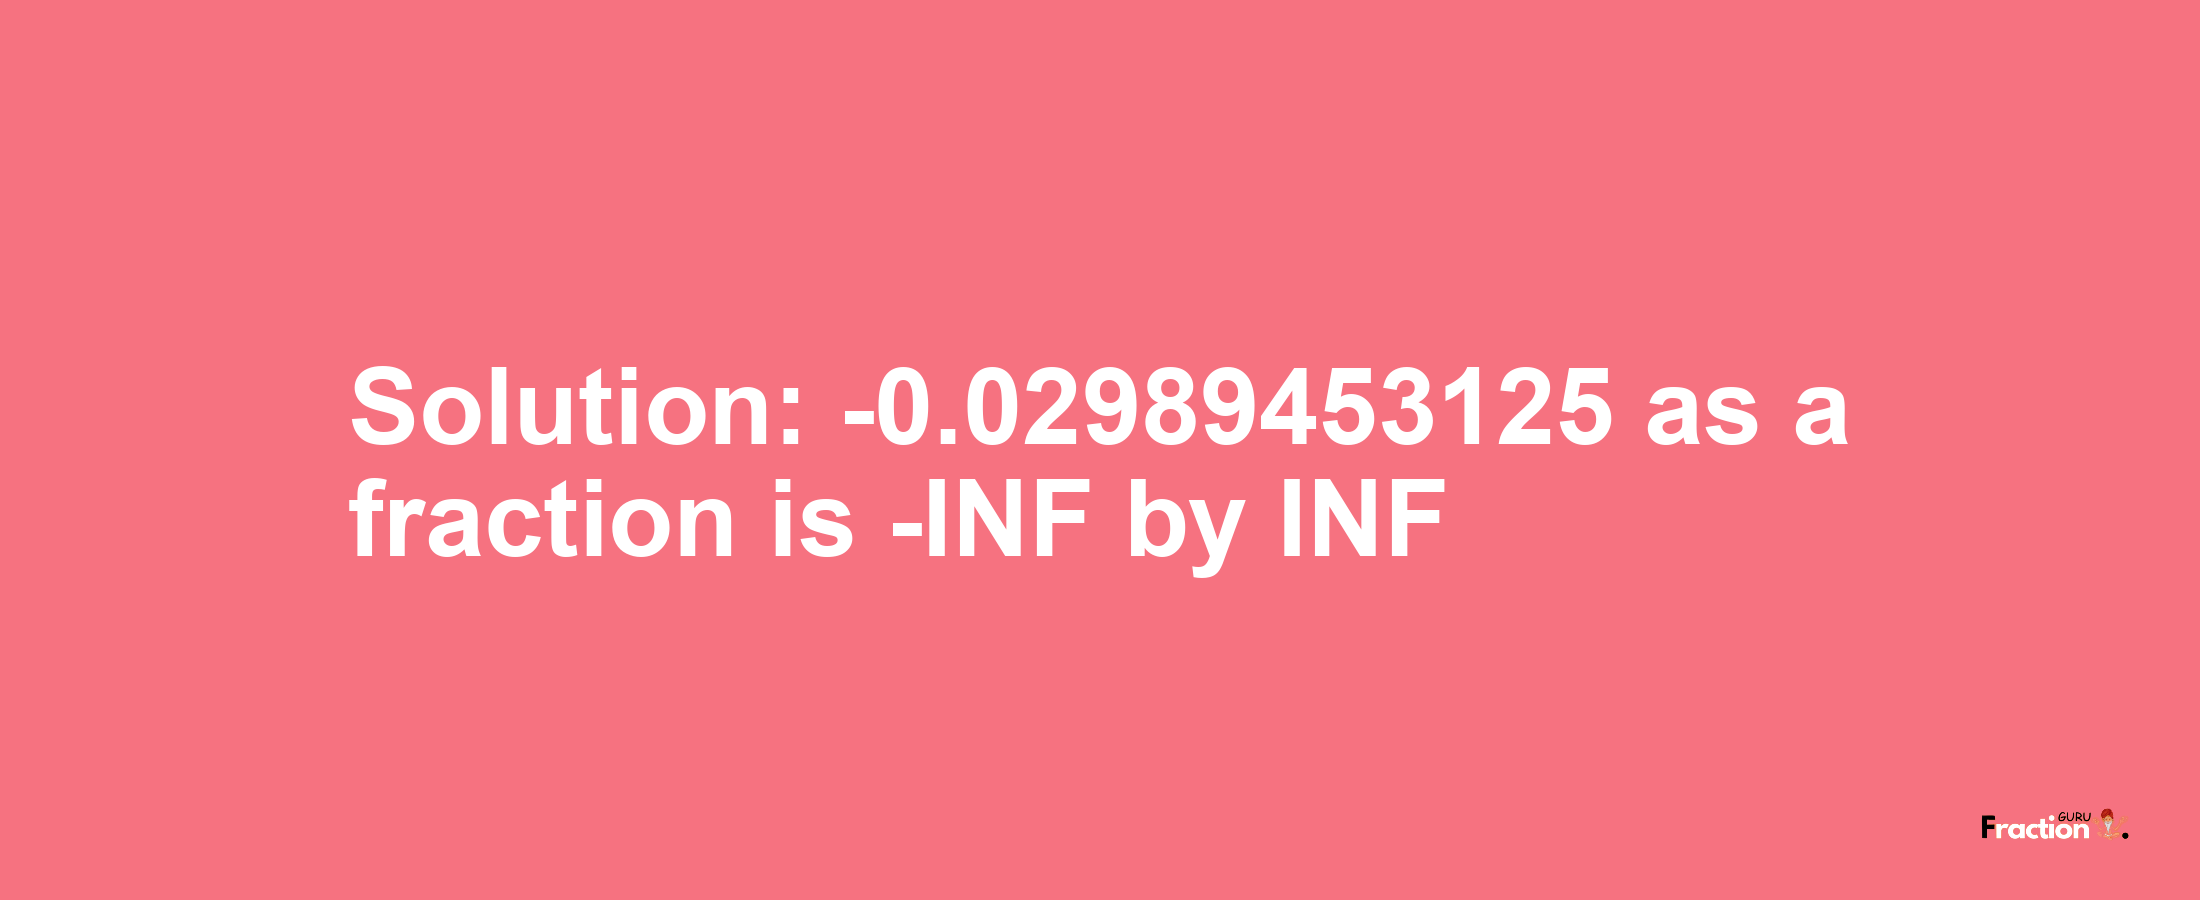 Solution:-0.02989453125 as a fraction is -INF/INF